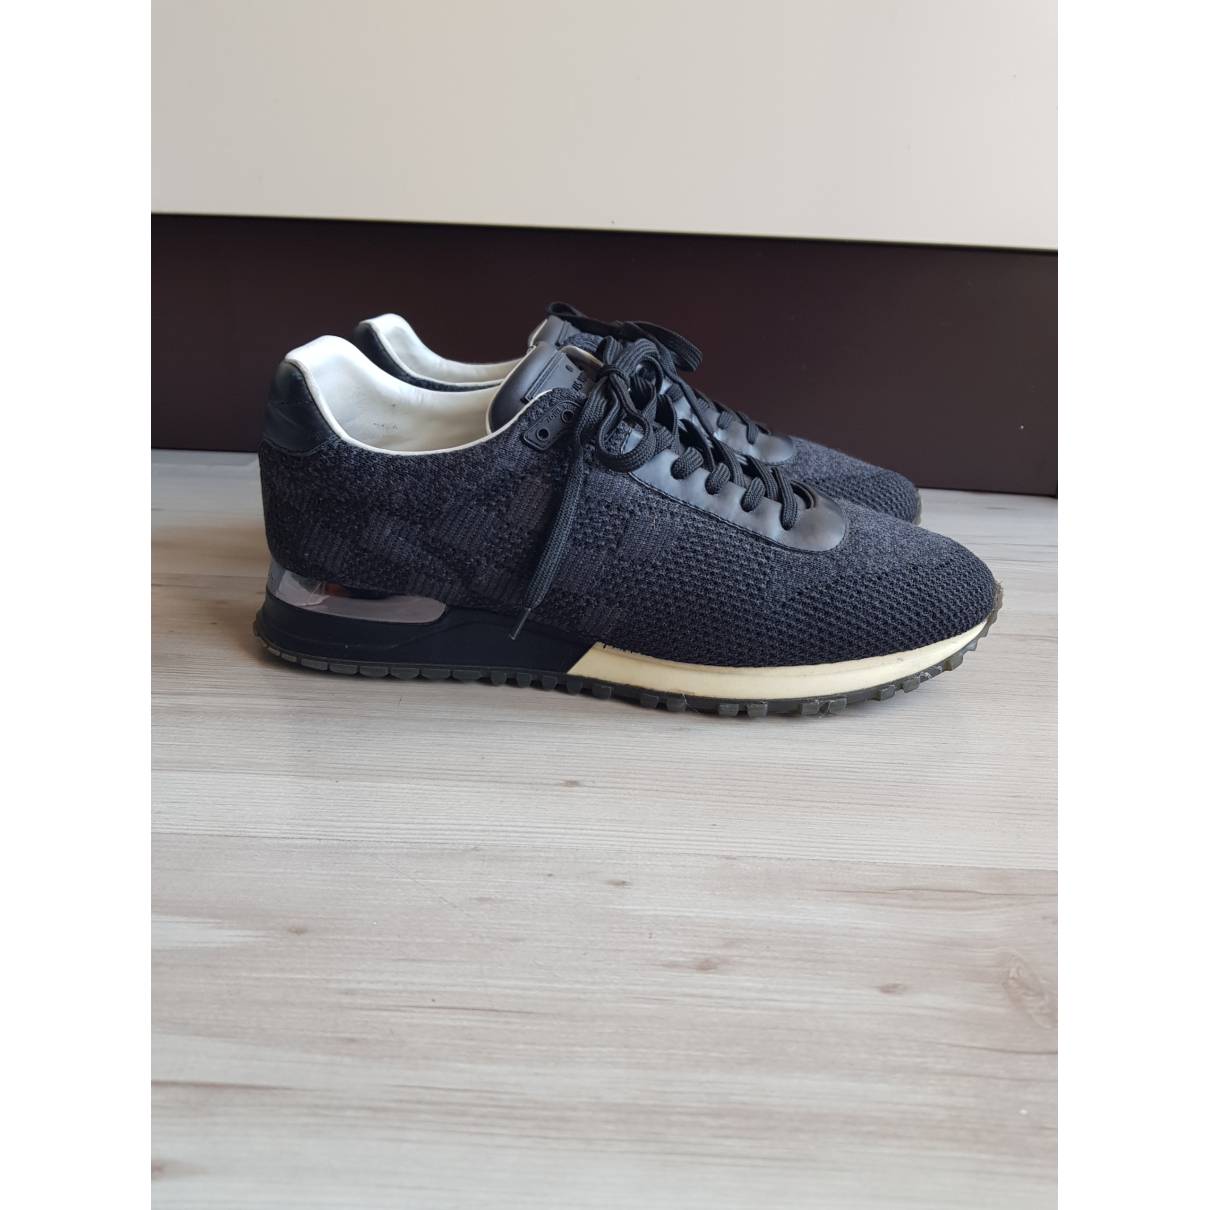 Lv runner active cloth low trainers Louis Vuitton Black size 11 UK